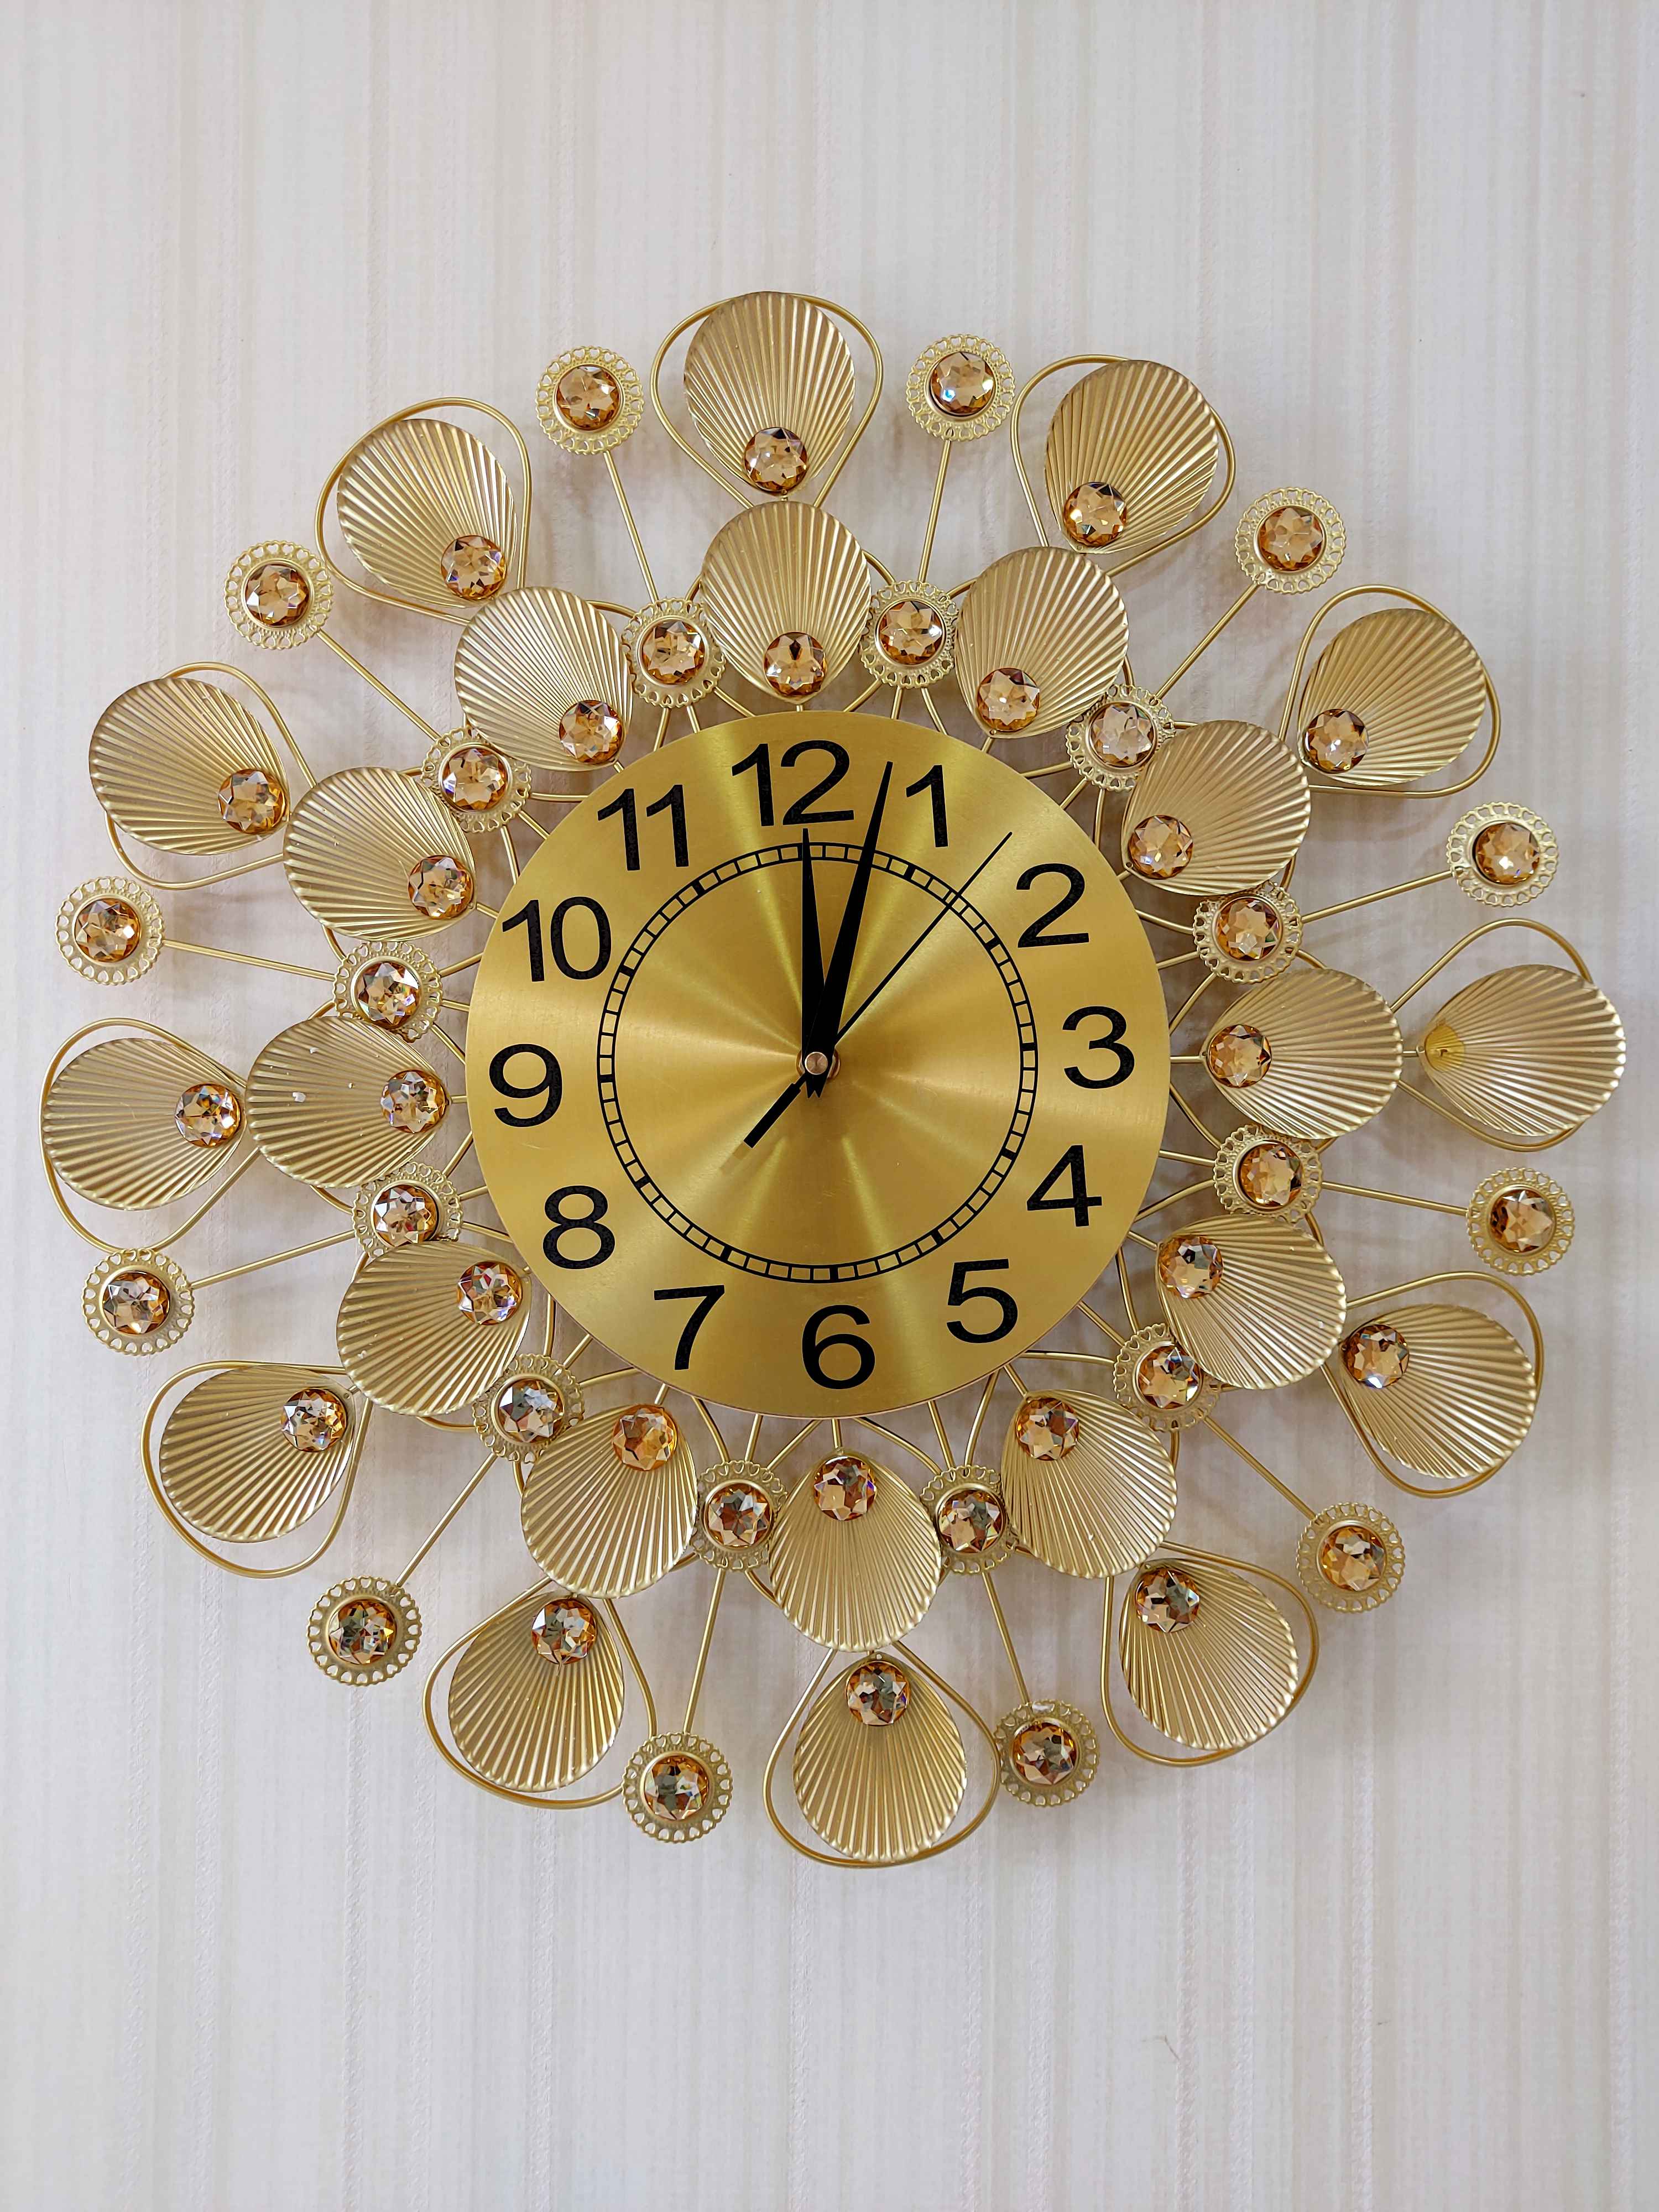 FunkyTradition 3D Golden Flower Pallets Diamond Studded Wall Clock, Wall Watch, Wall Decor for Home Office Decor and Gifts 50 CM Tall